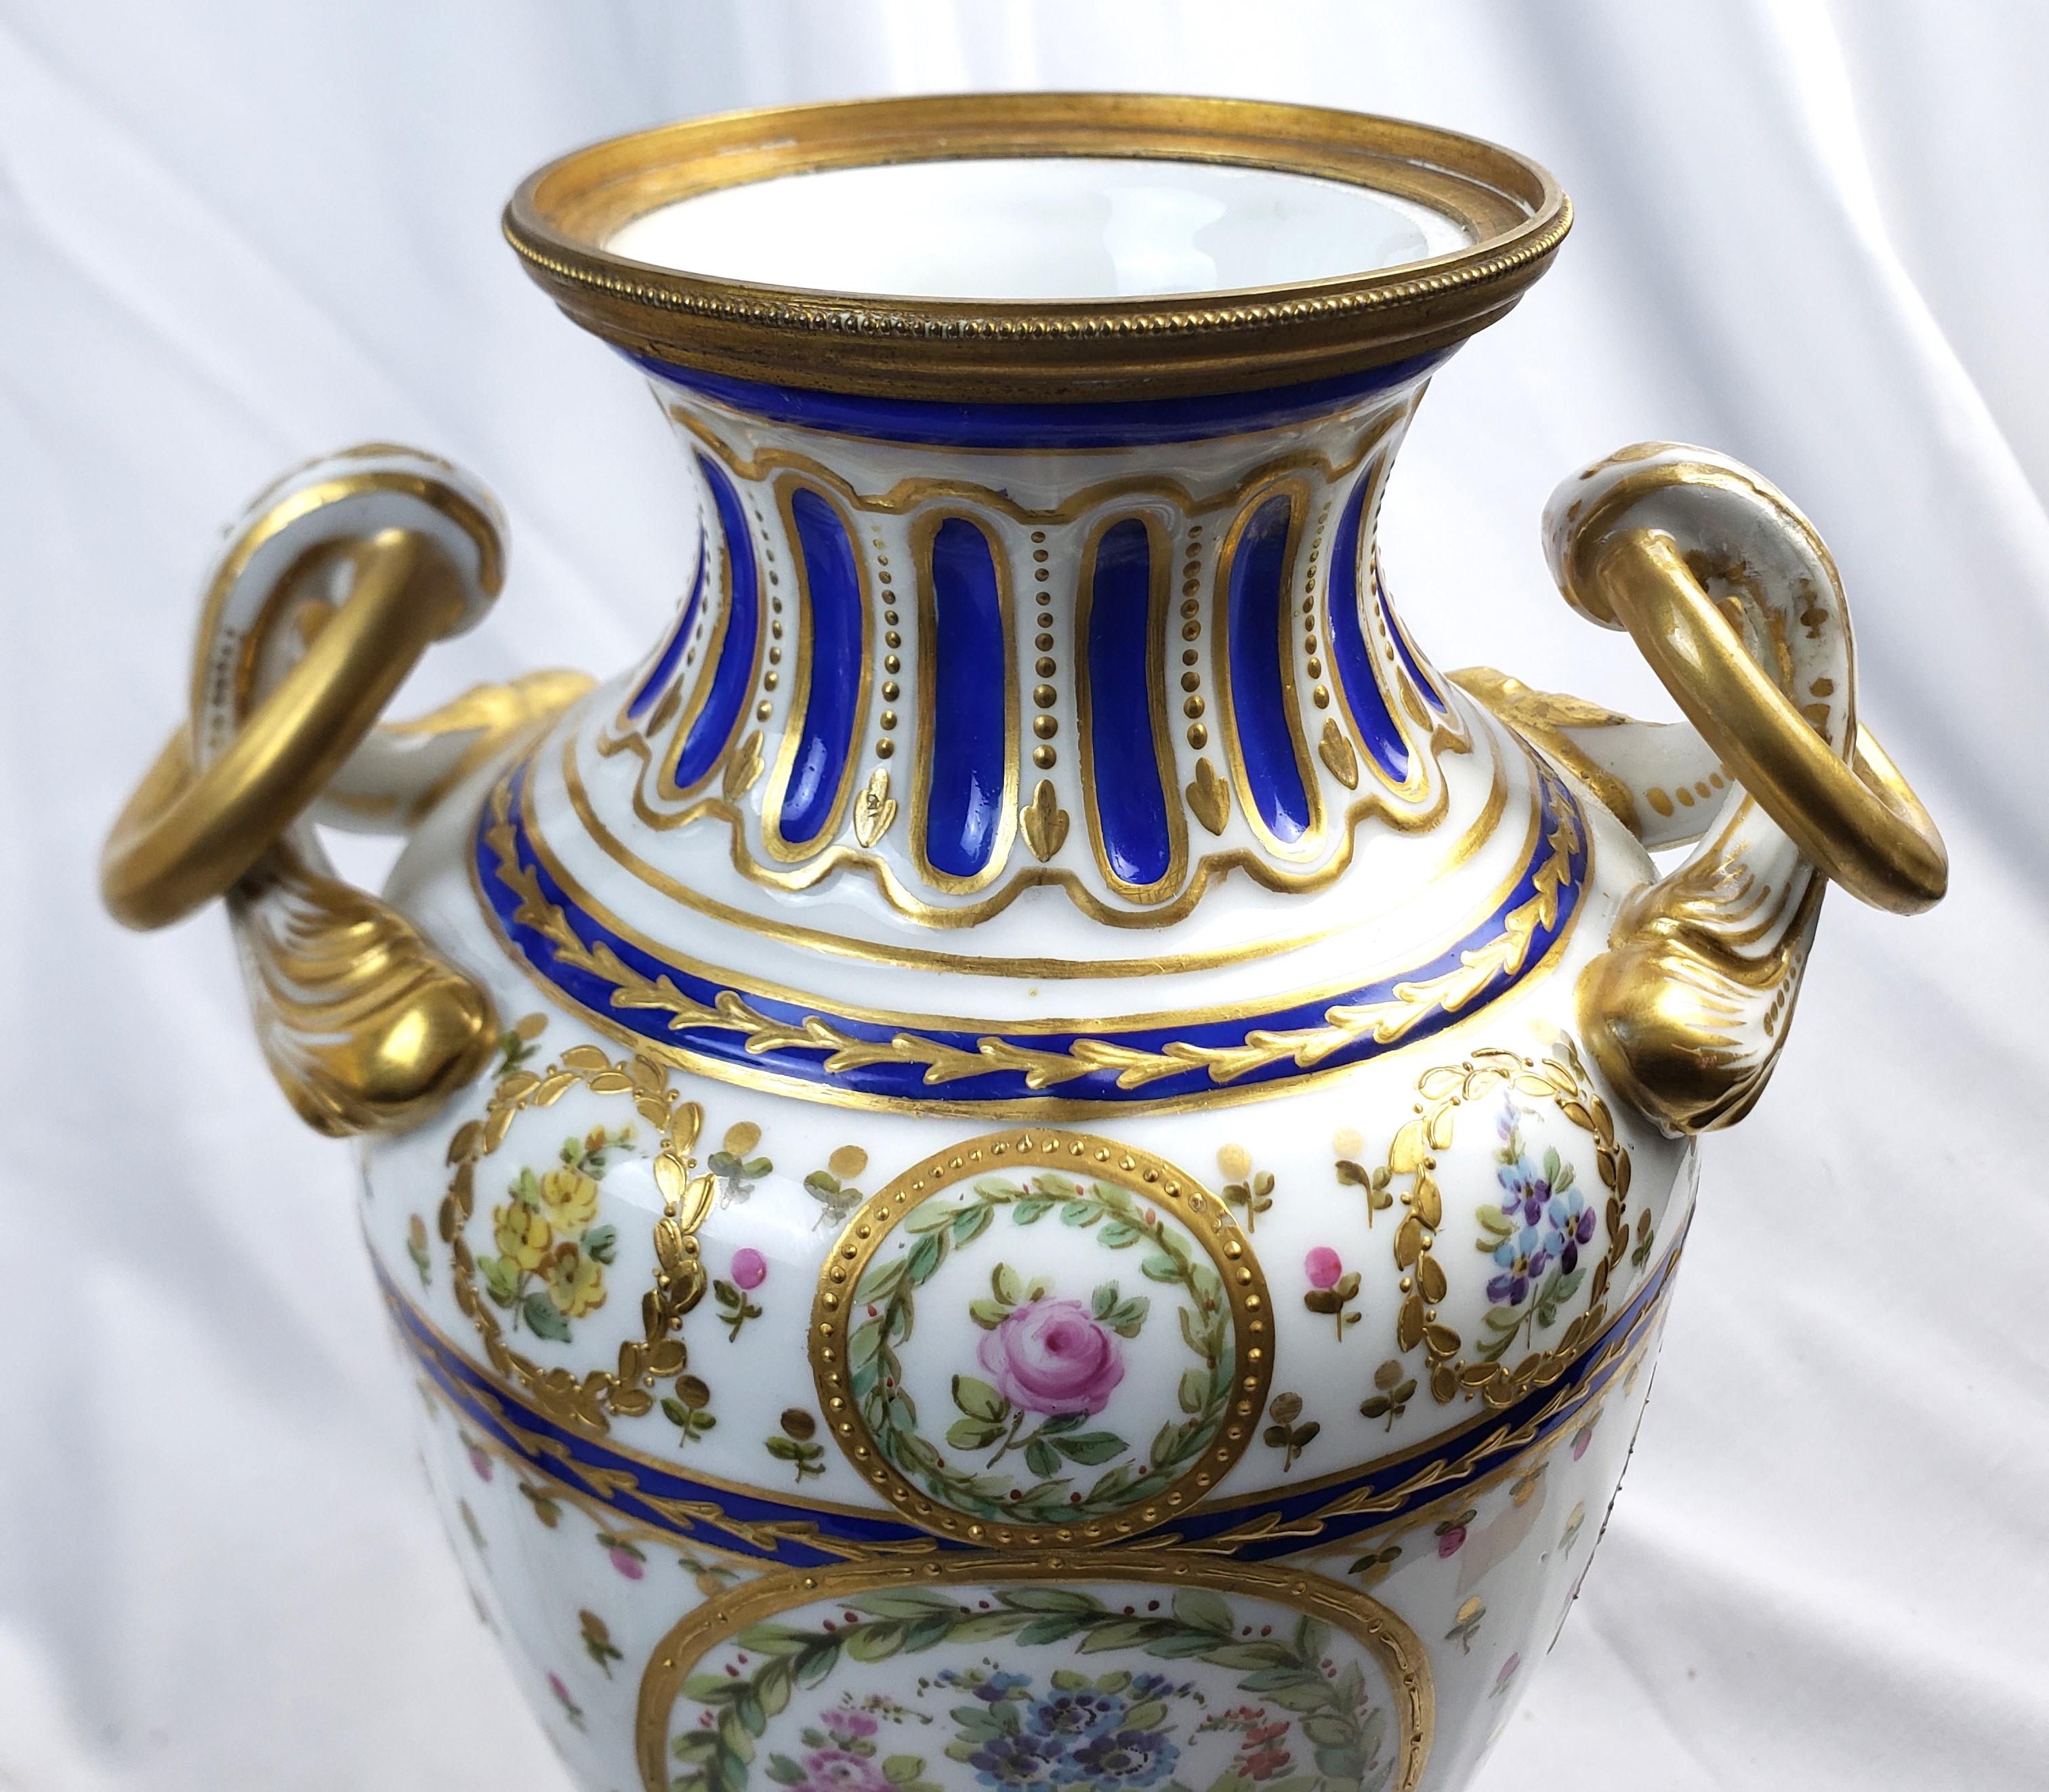 Pair of Antique Sevres Styled Covered Urns with Ornate Hand-Painted Decoration For Sale 5